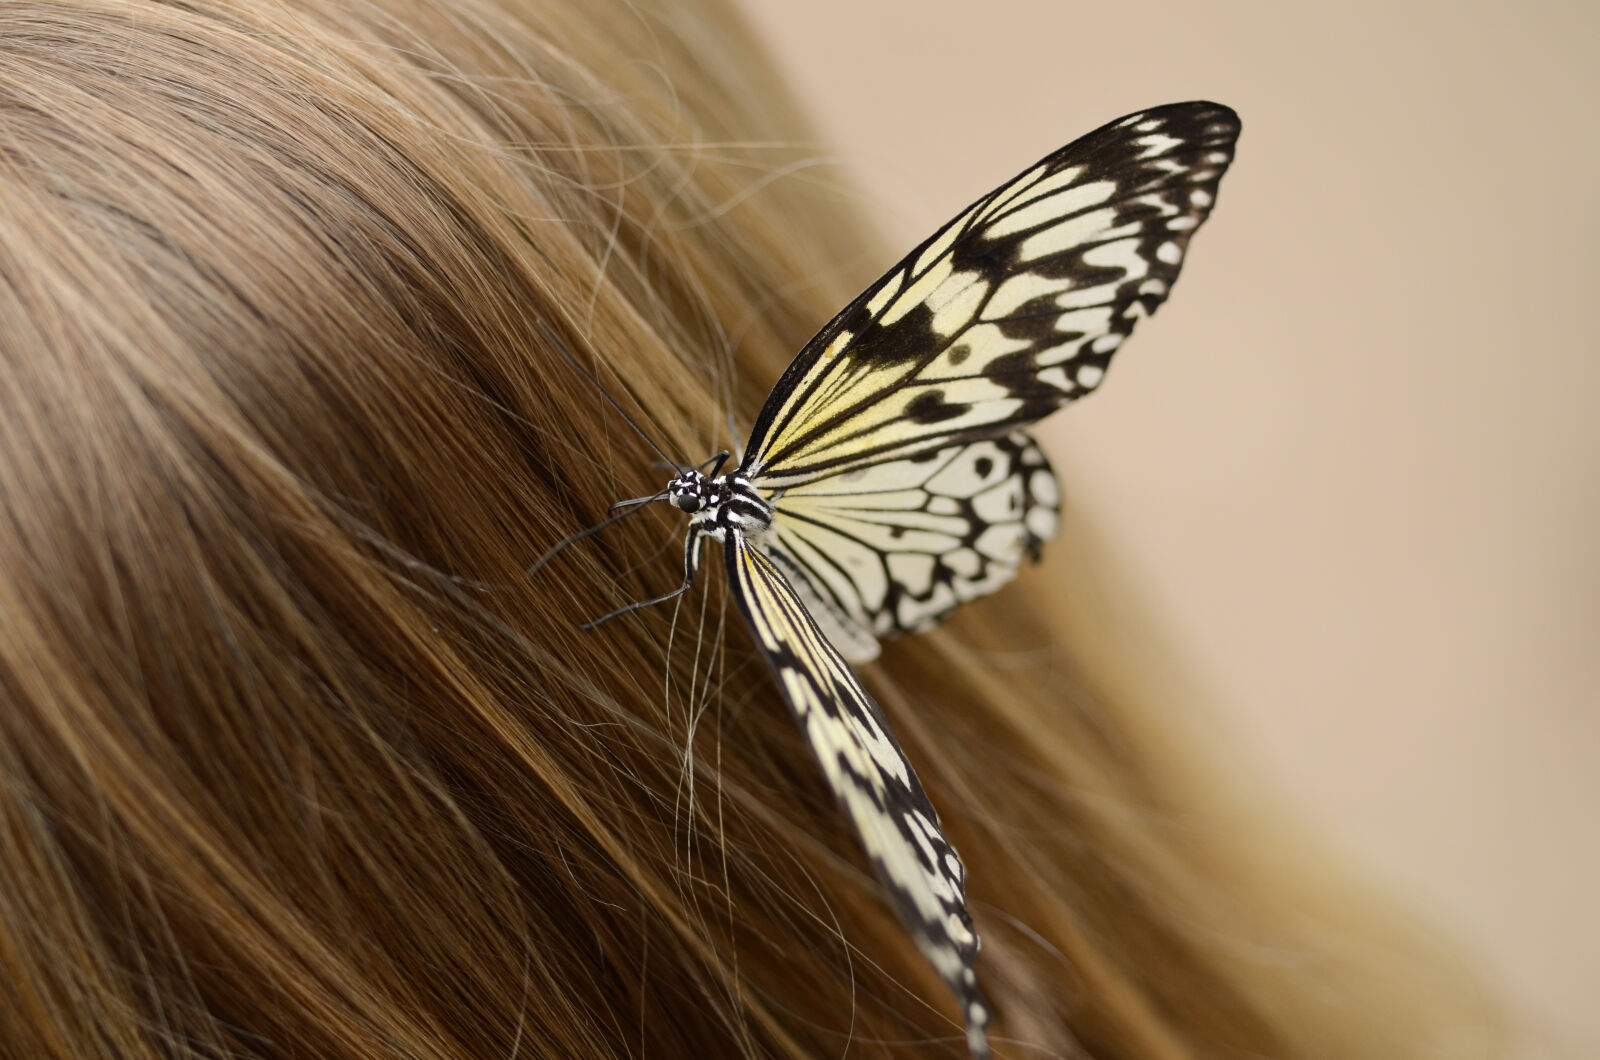 AF Micro-Nikkor 55mm f/2.8 sample photo. Butterfly, girl, hair, sitting photography